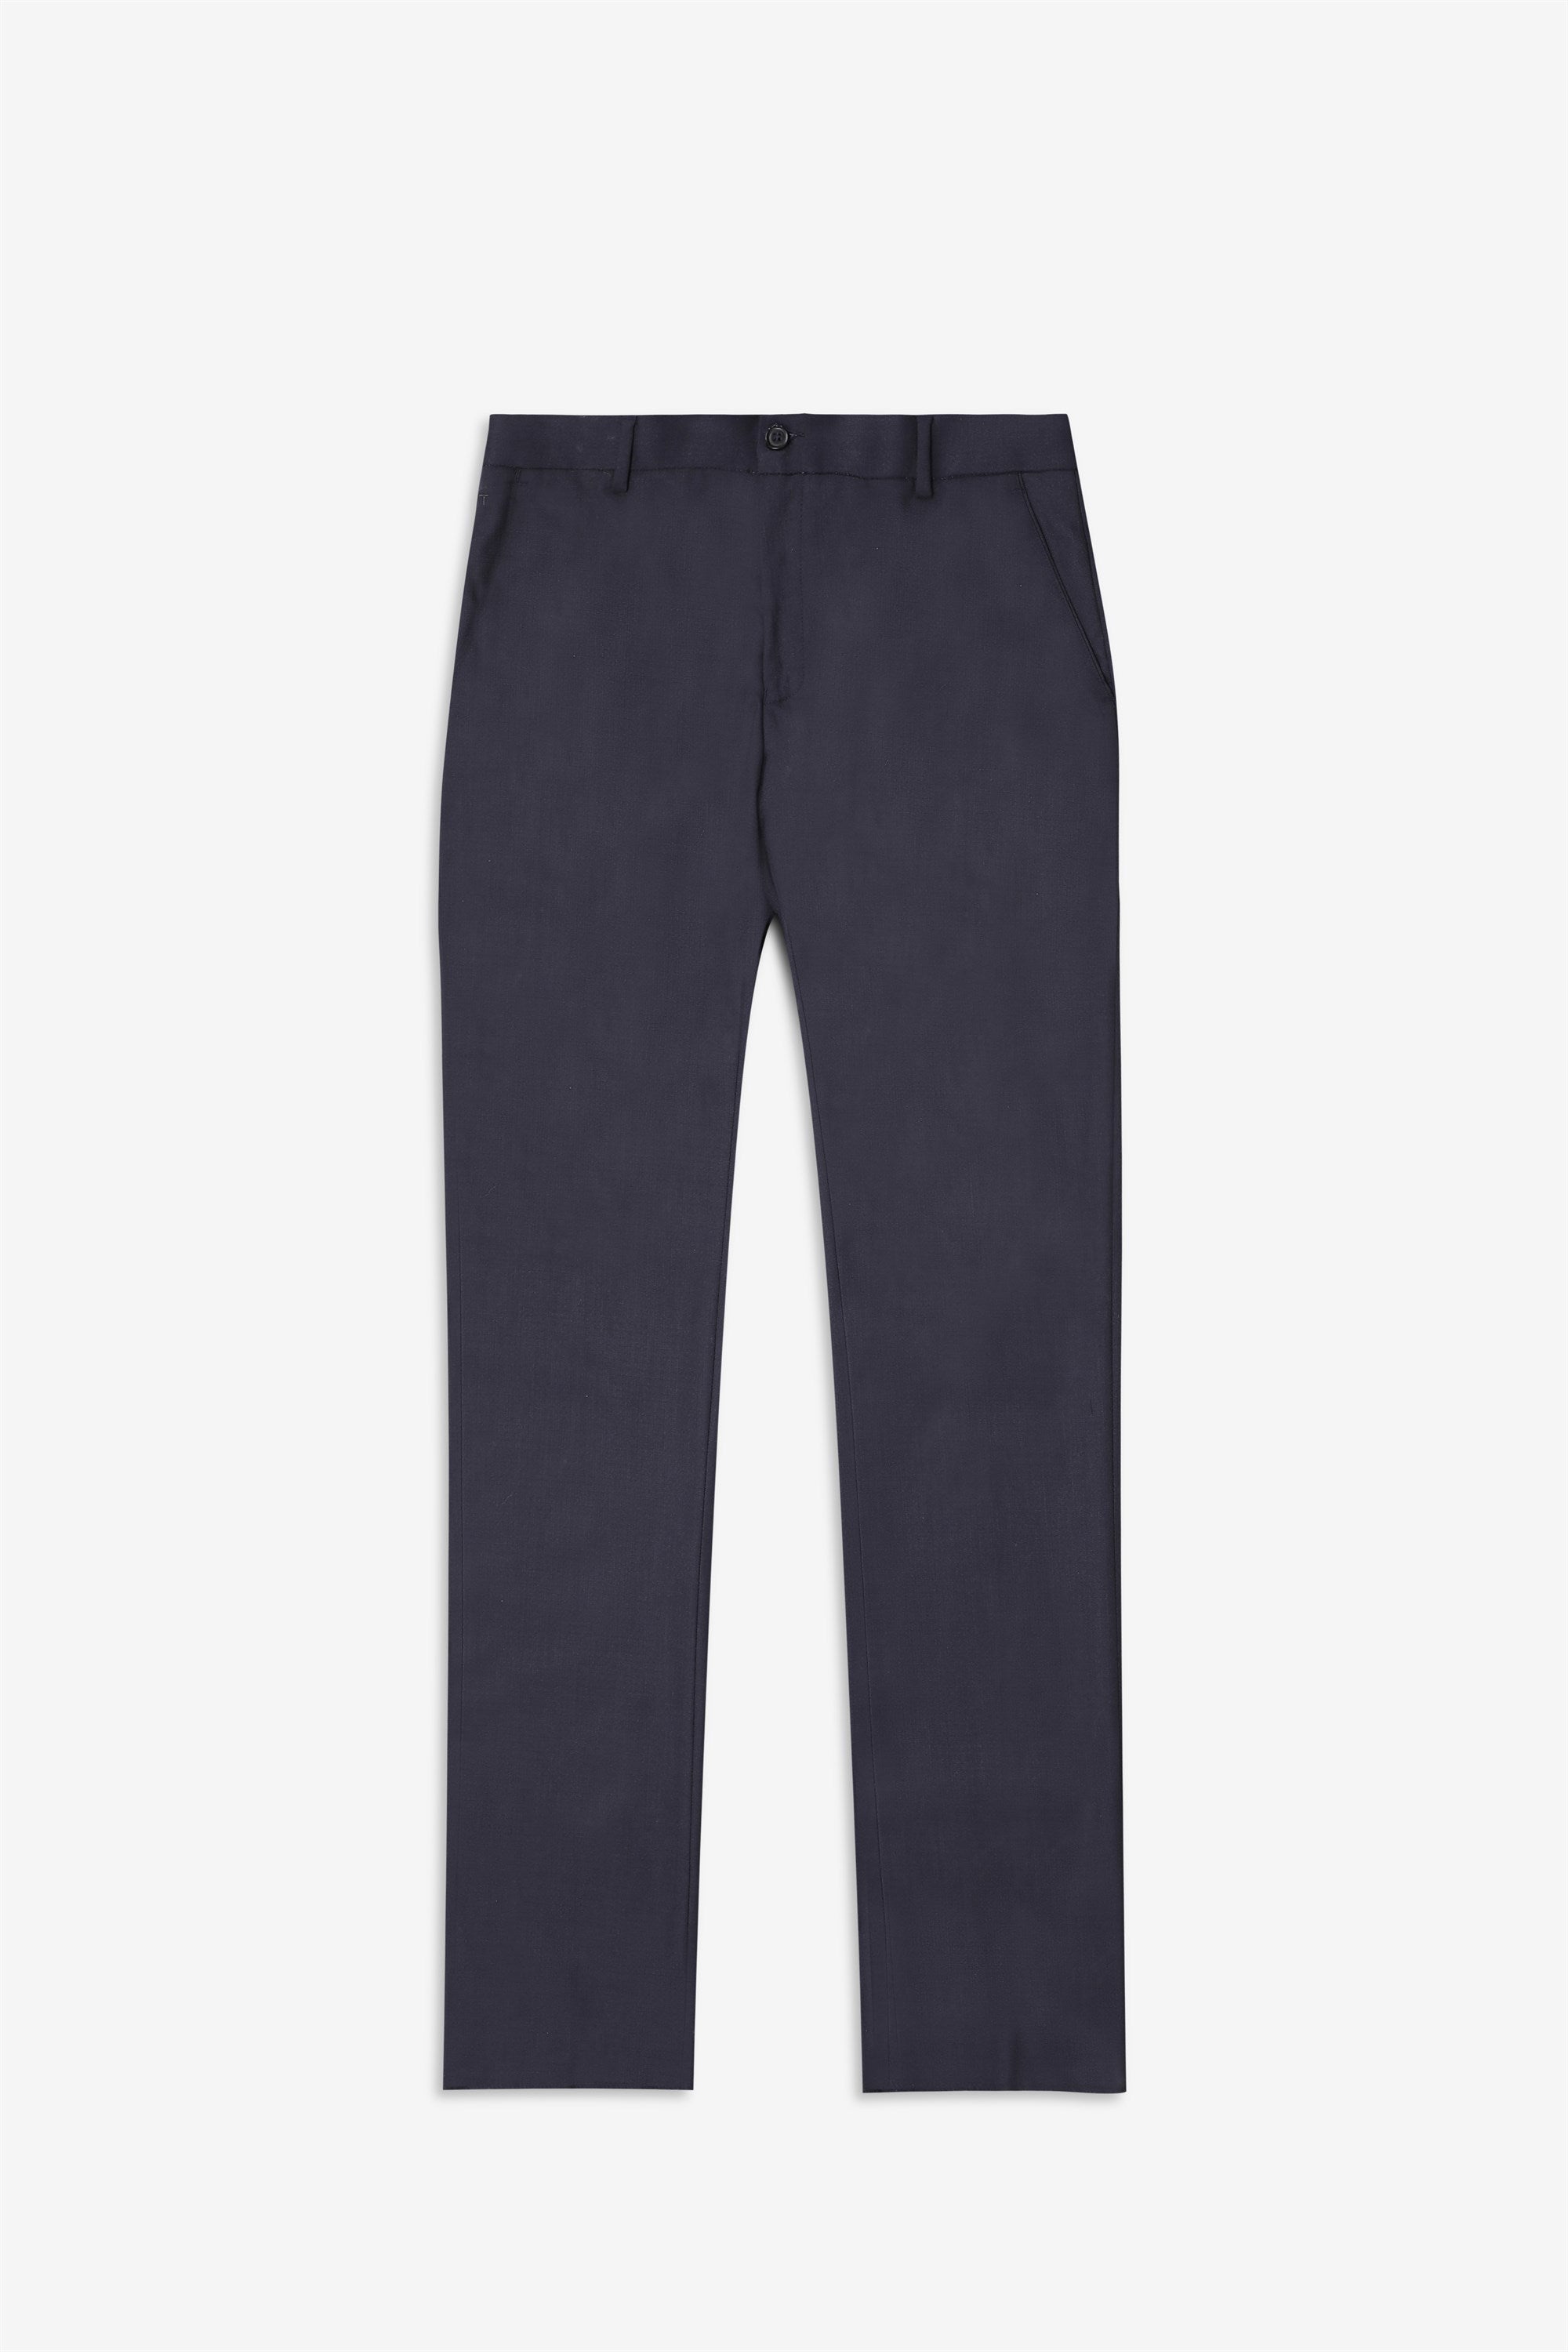 T the brand Stretch Formal Flat Front Trouser - Grey